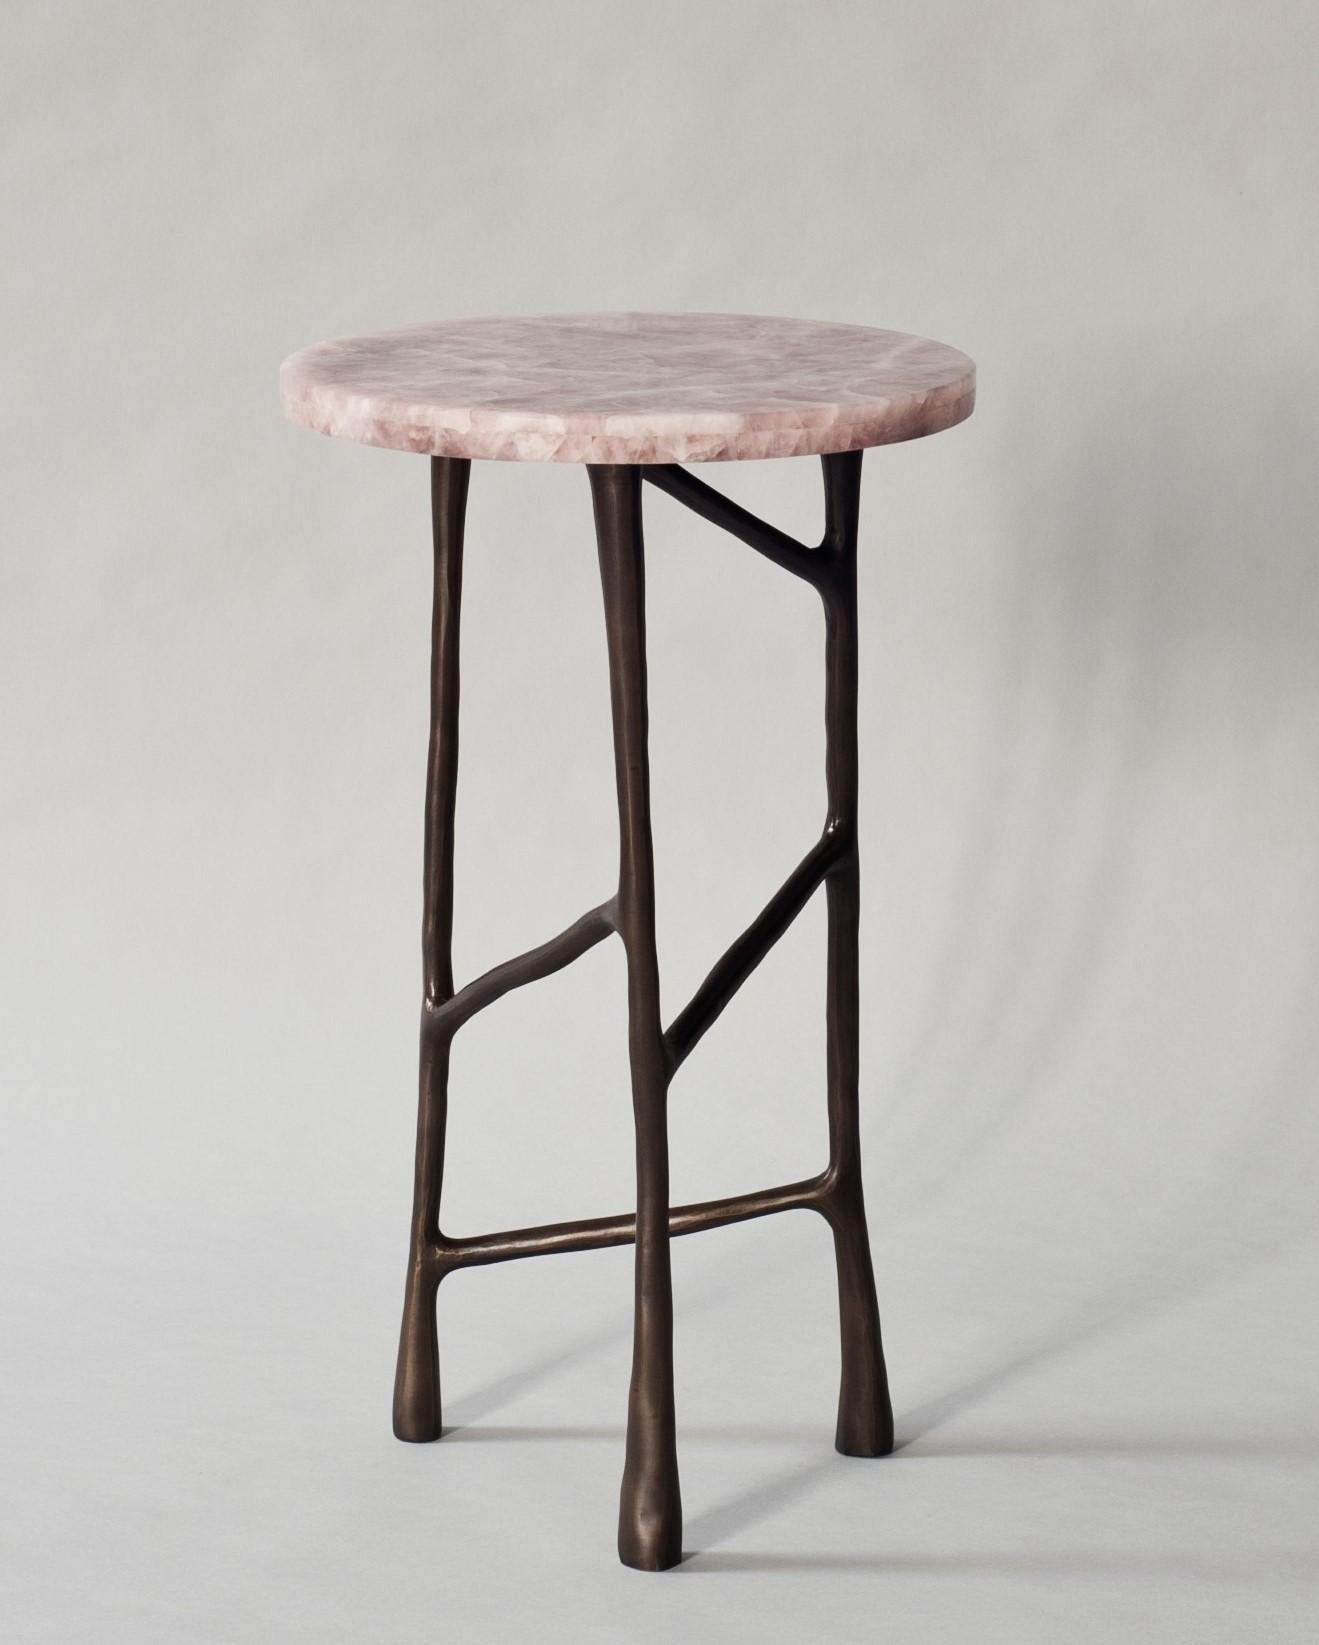 The Forma side or drinks table by DeMuro Das has a top in pink quartz and a sculptural hand cast base in solid antique bronze.